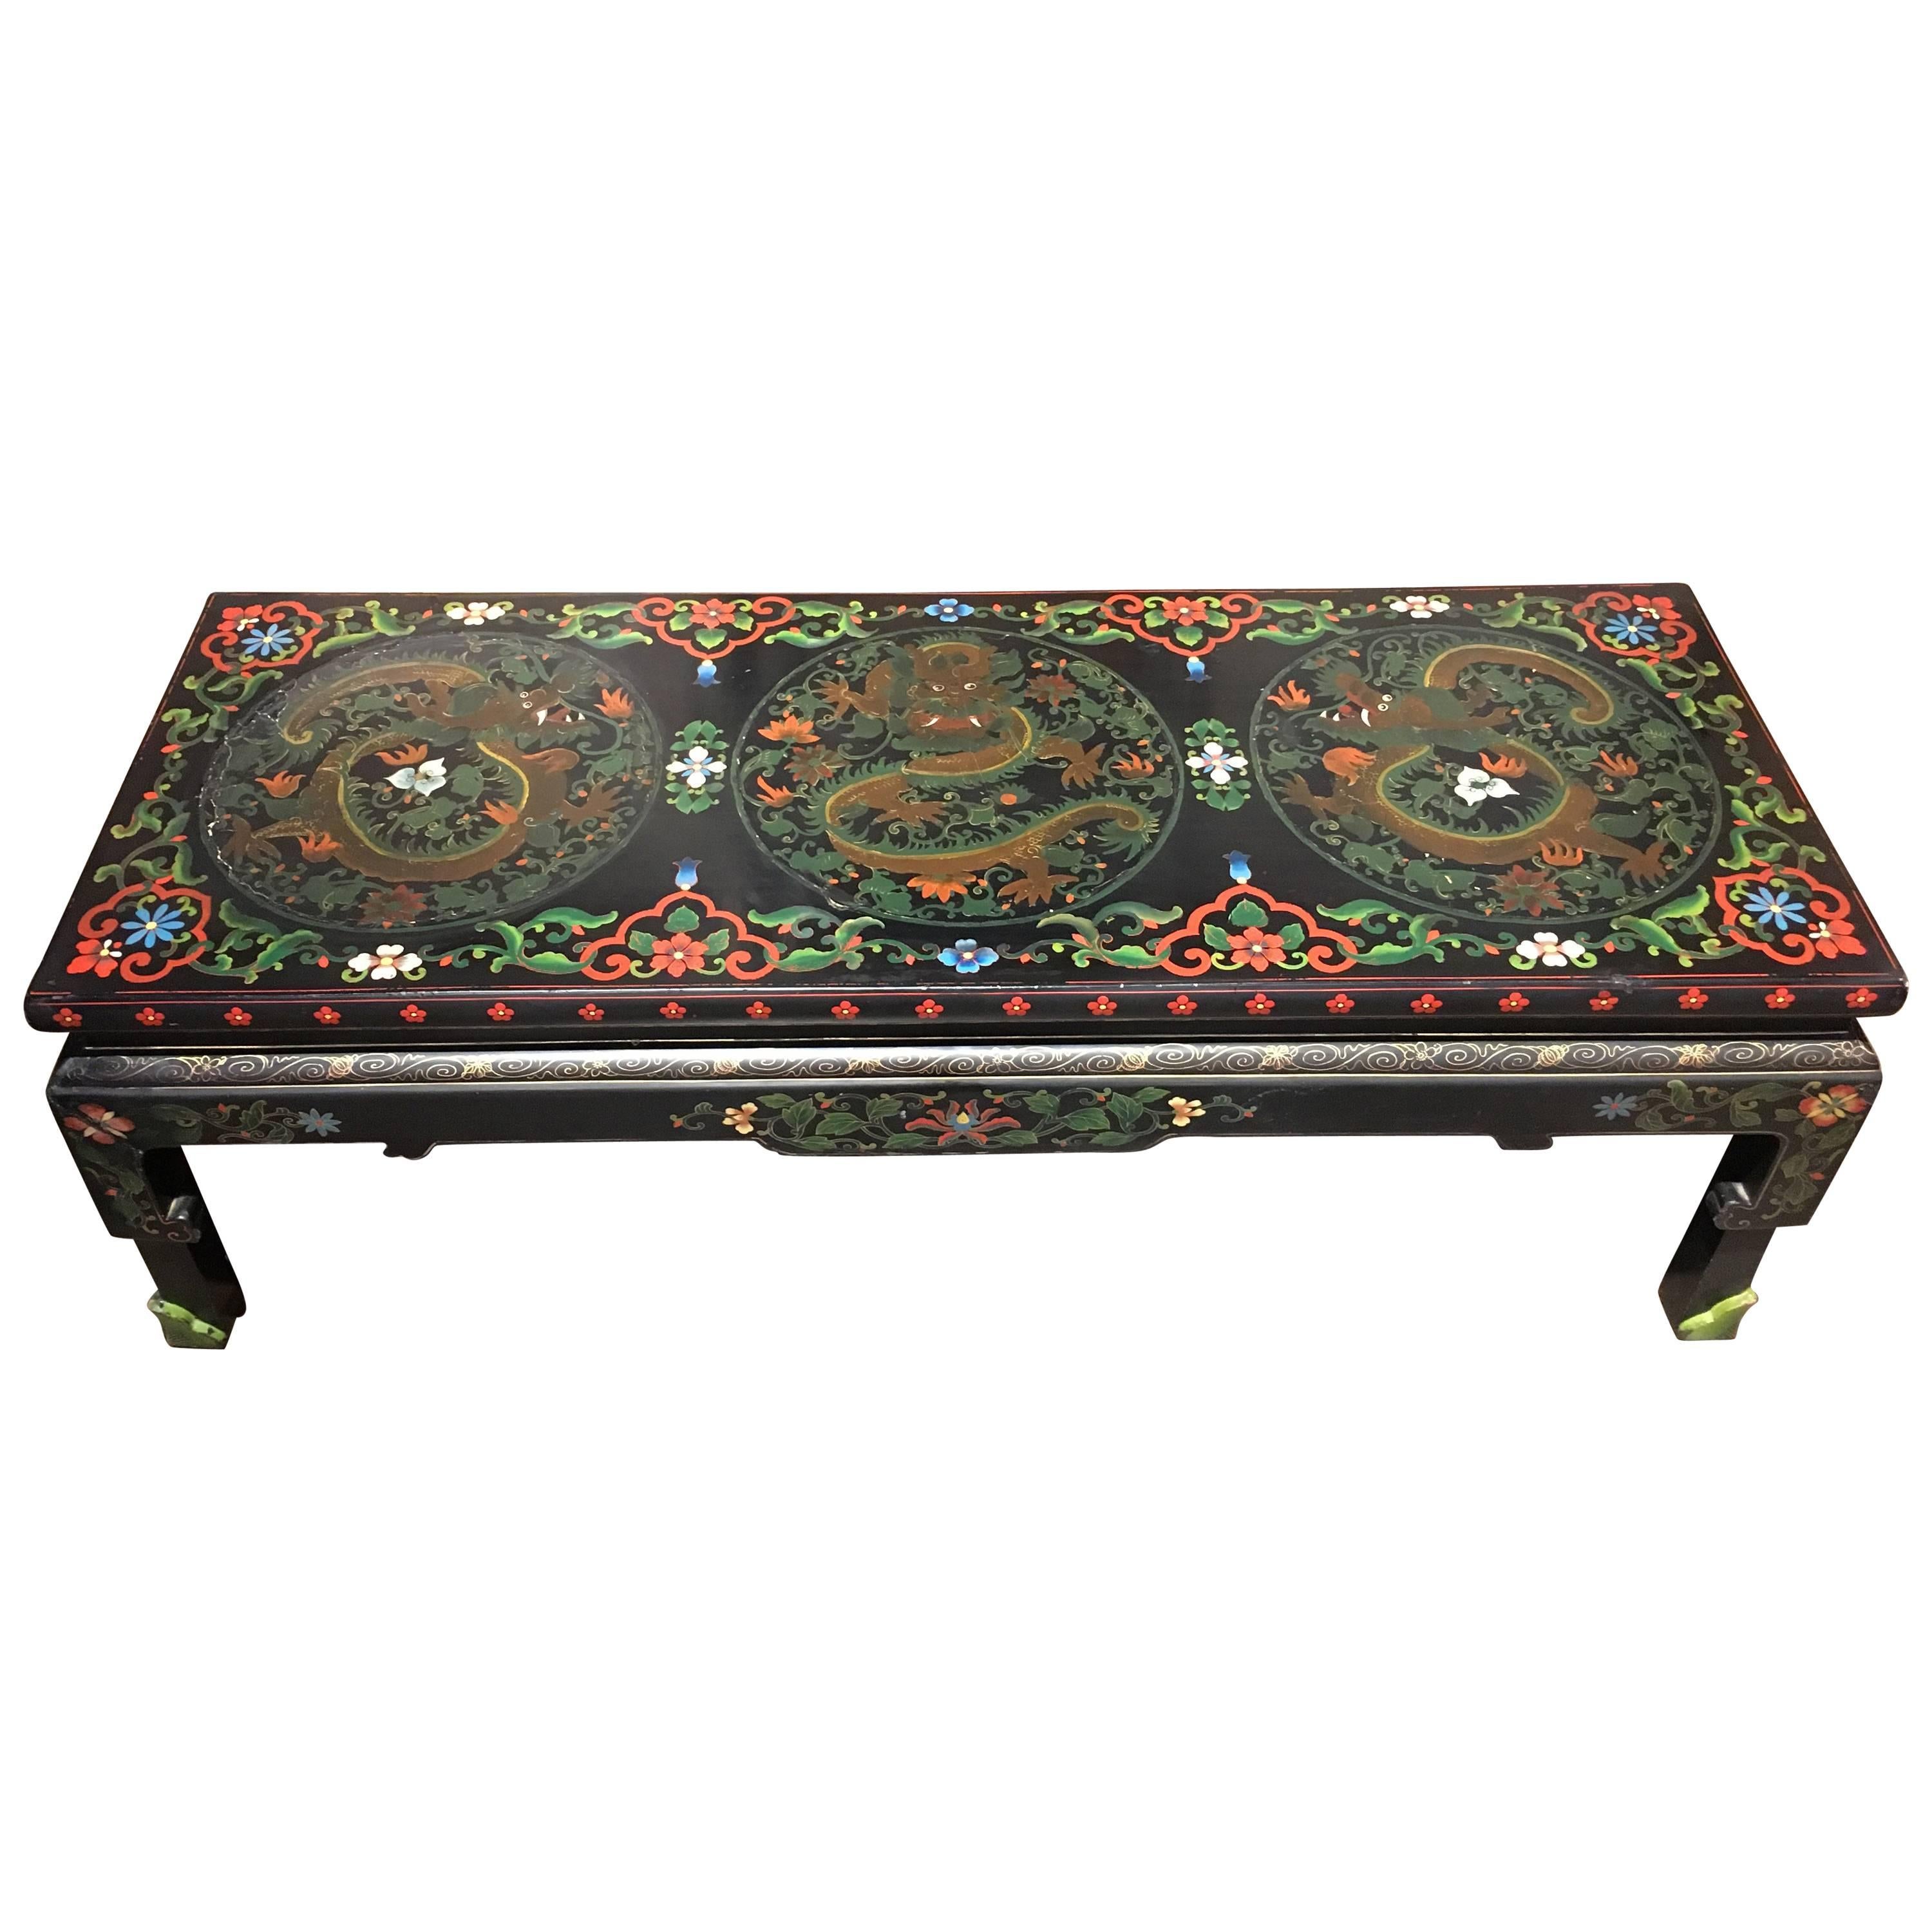 1950s Chinese Black Lacquer Painted Dragon Coffee Table or Bench